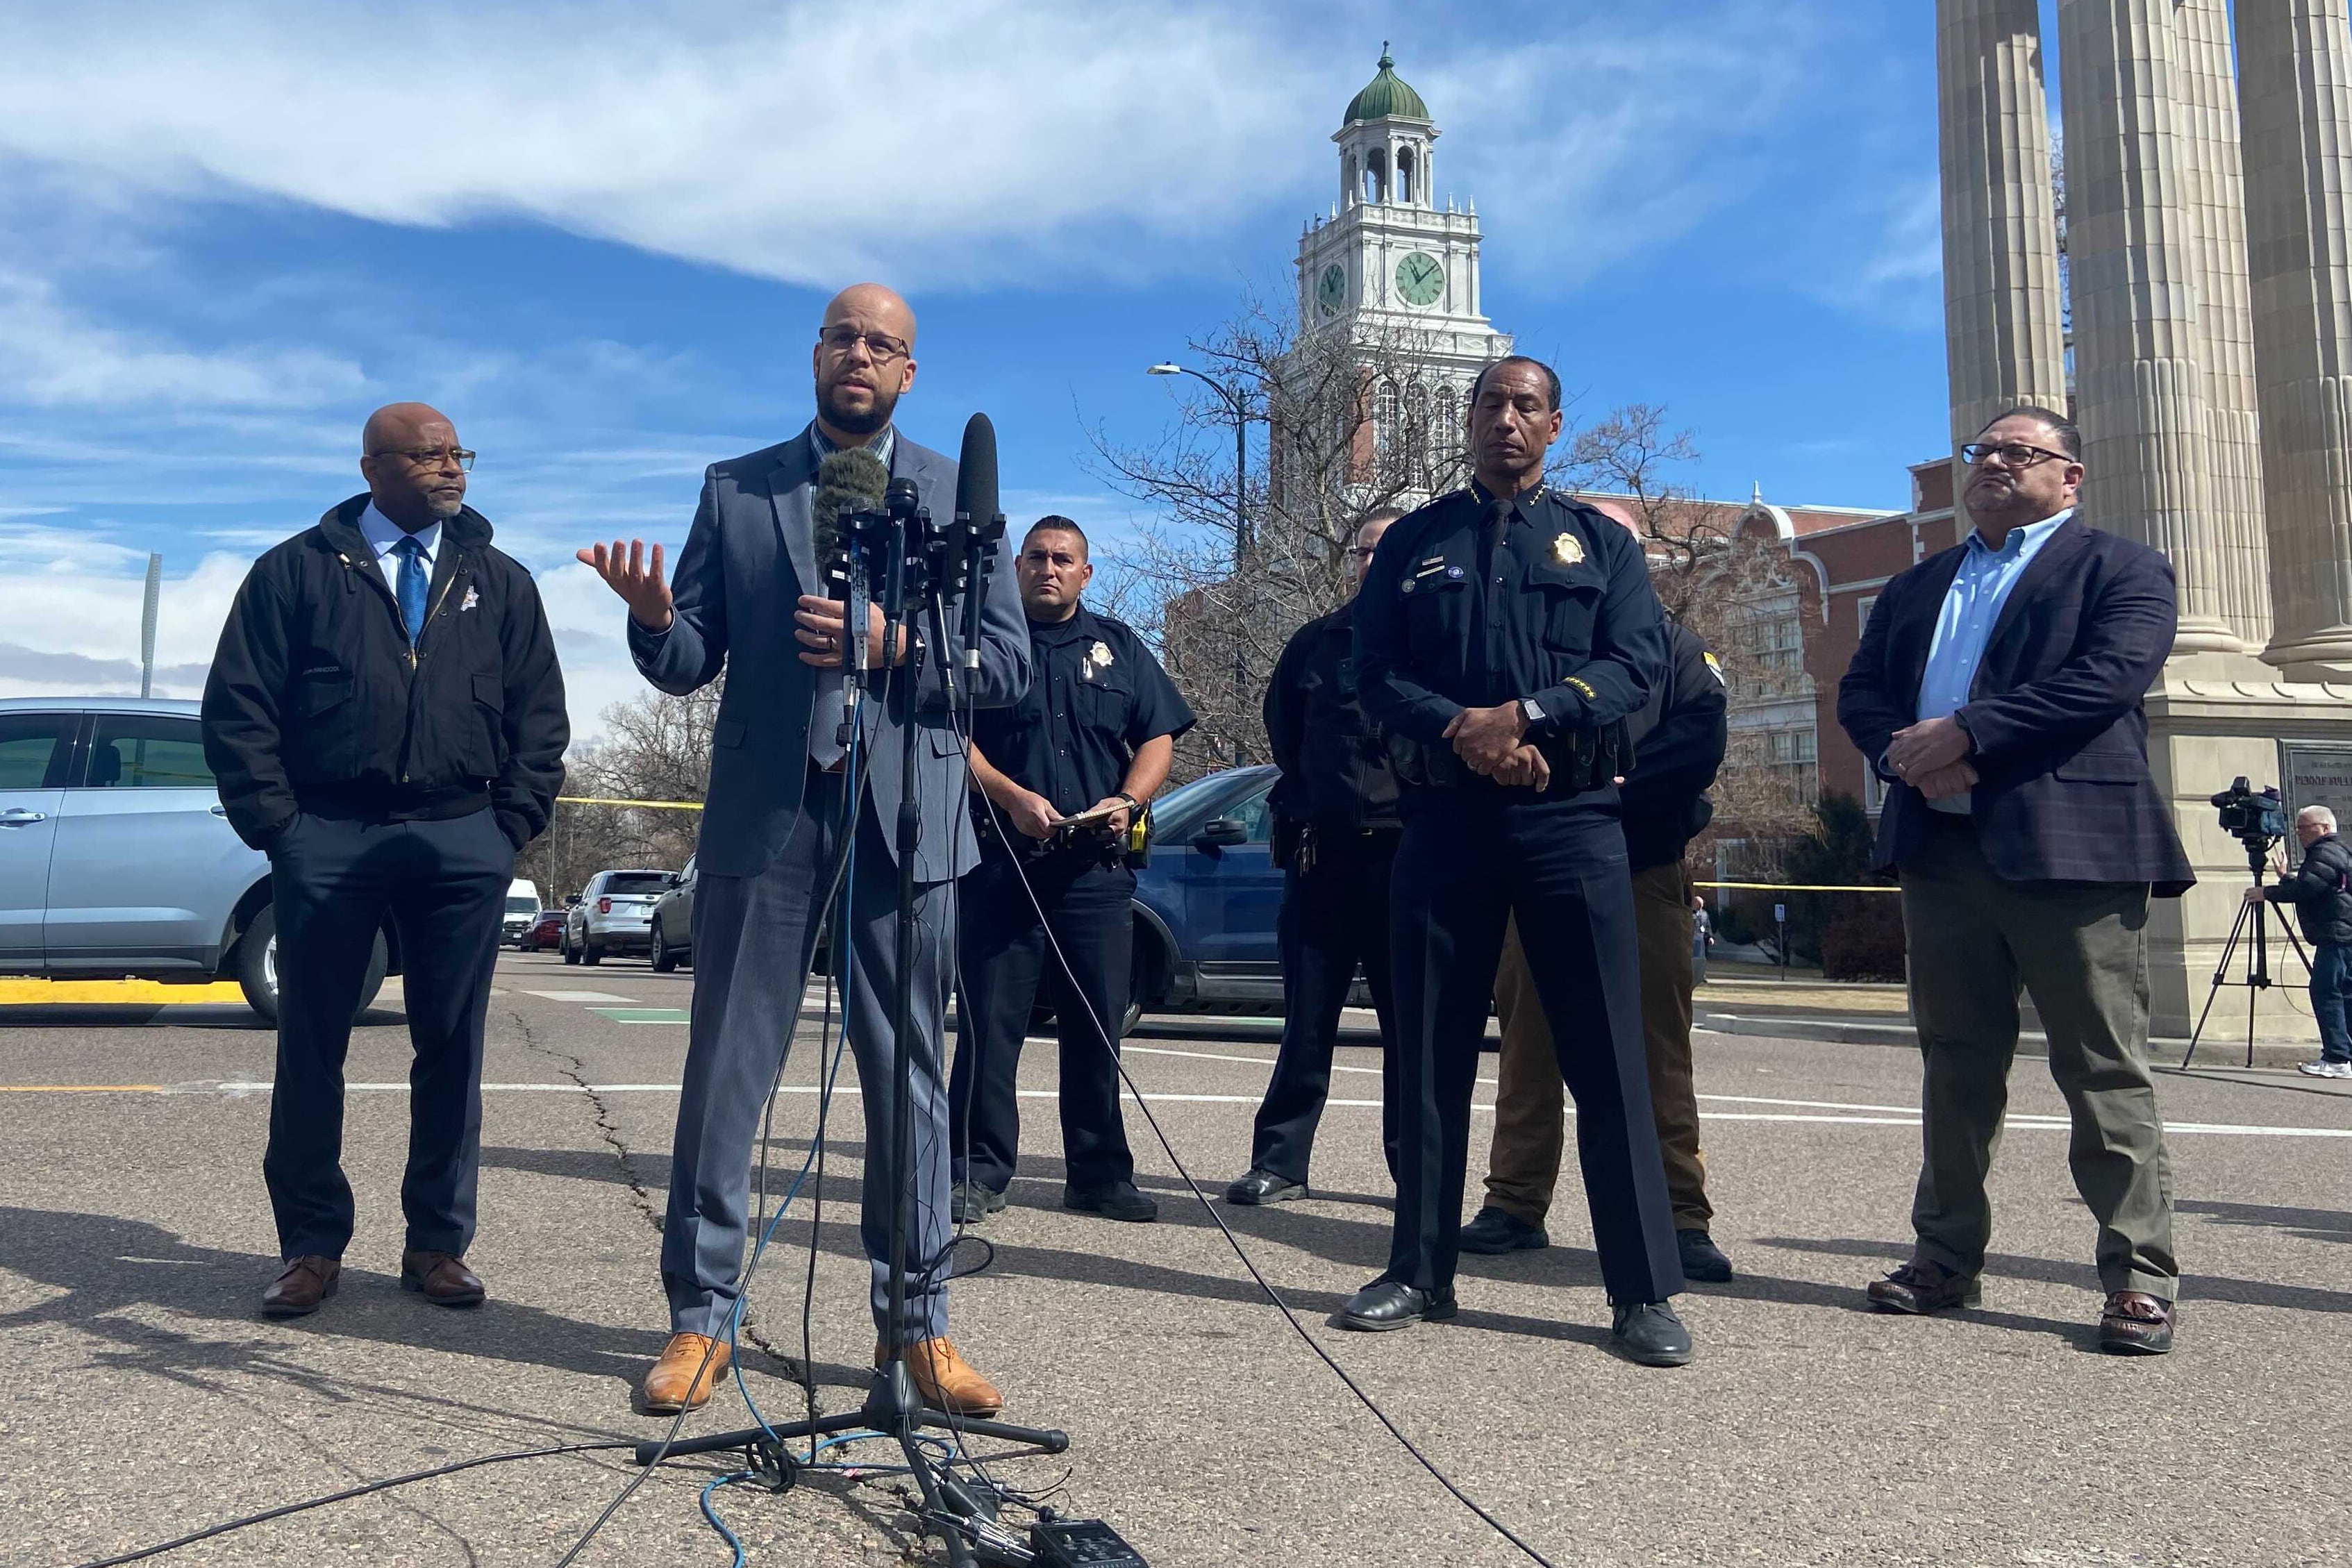 A group of men in suits and one in police dress uniform speak at a press conference. They are outside with a podium and microphones set up in front of them. East High School is visible behind them.